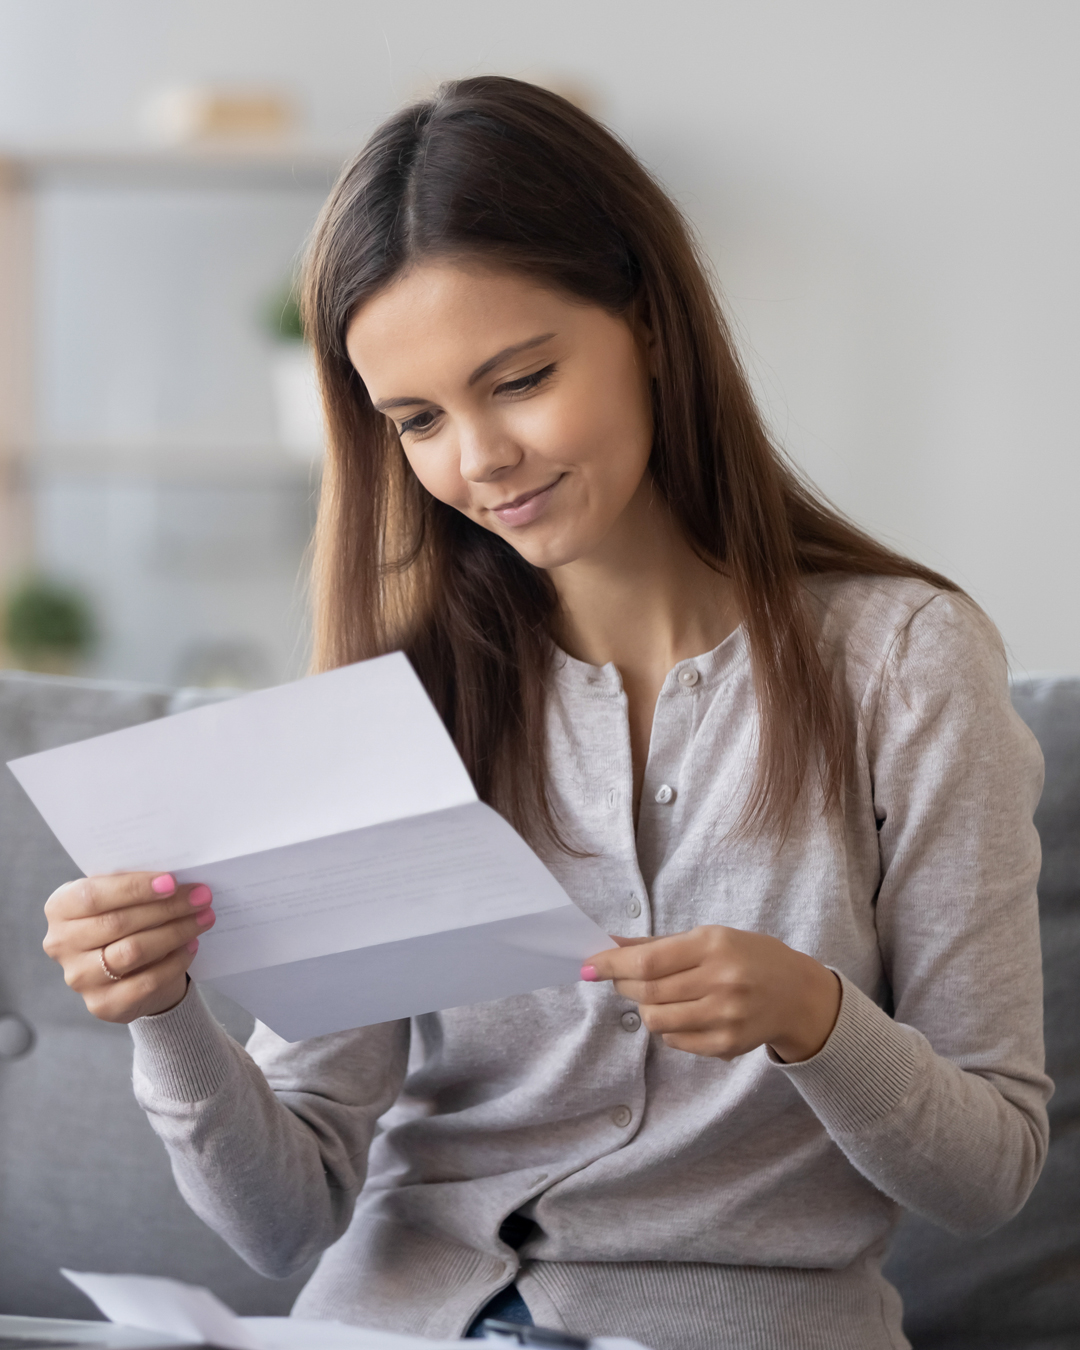 Woman smiles slightly looking at piece of paper